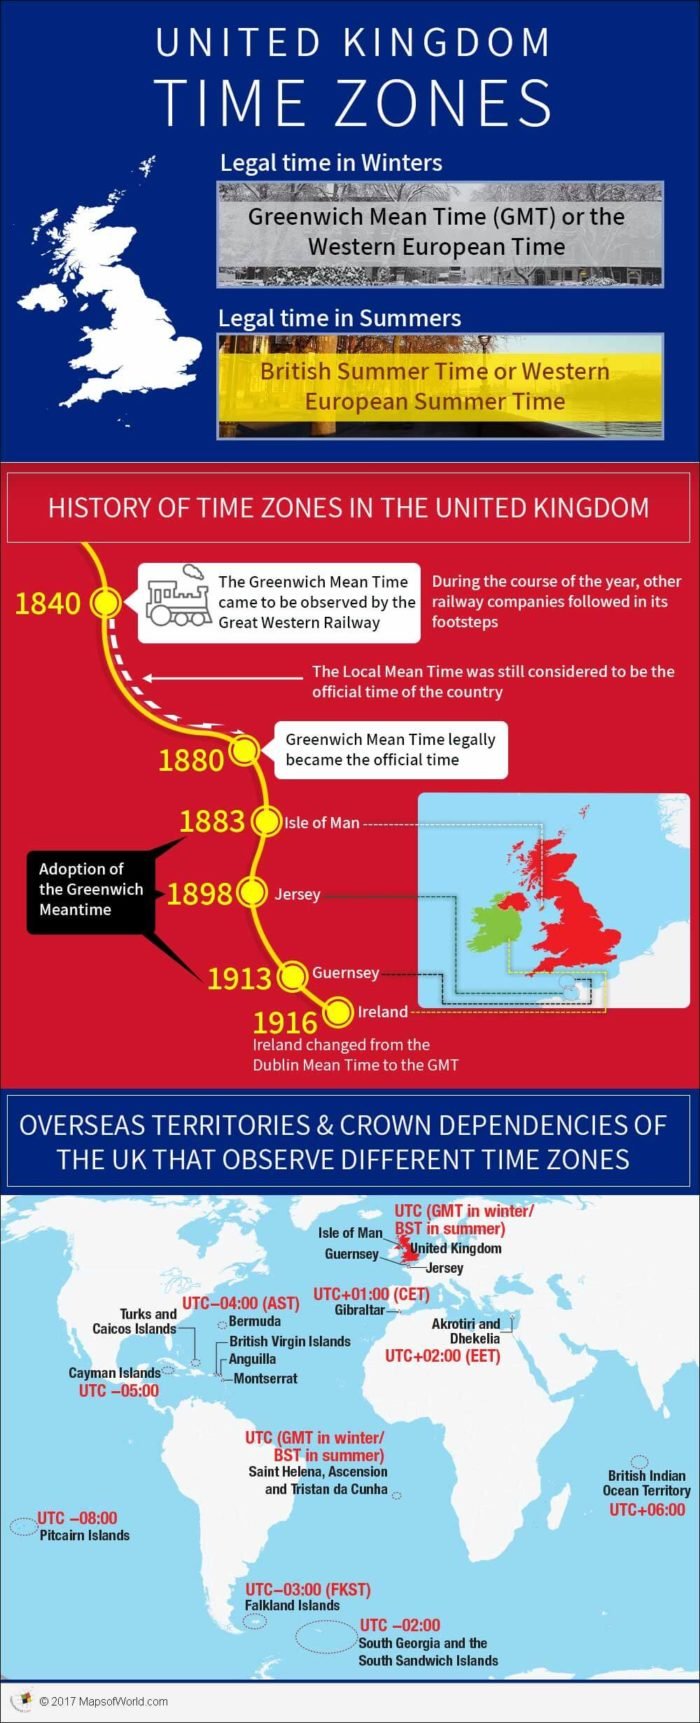 An Infographic on Time Zones of the United Kingdom